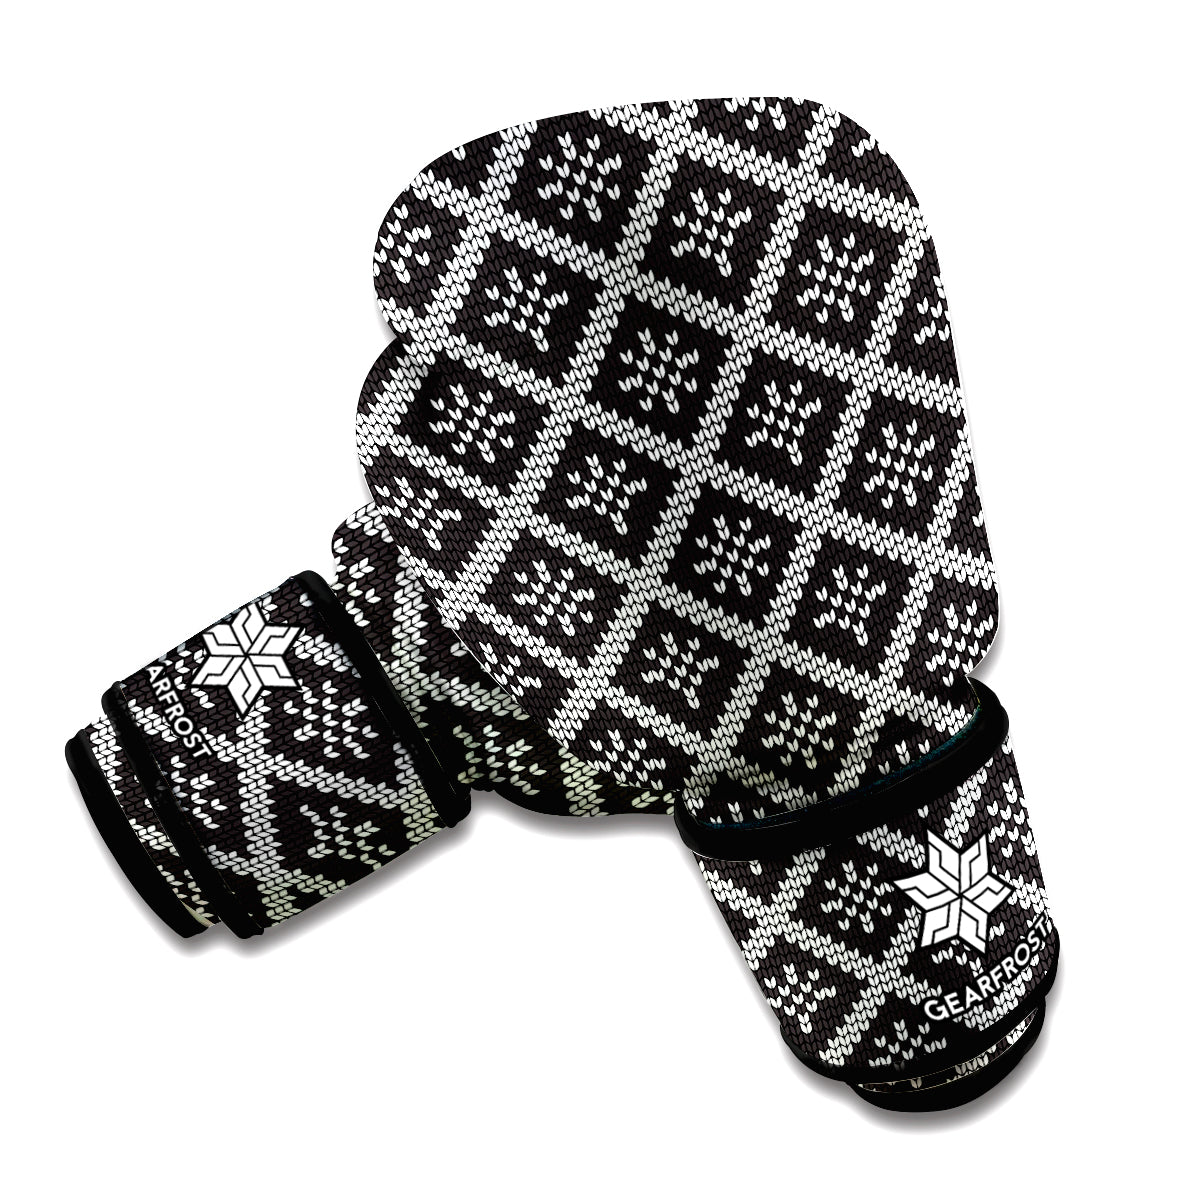 Black And White Knitted Pattern Print Boxing Gloves